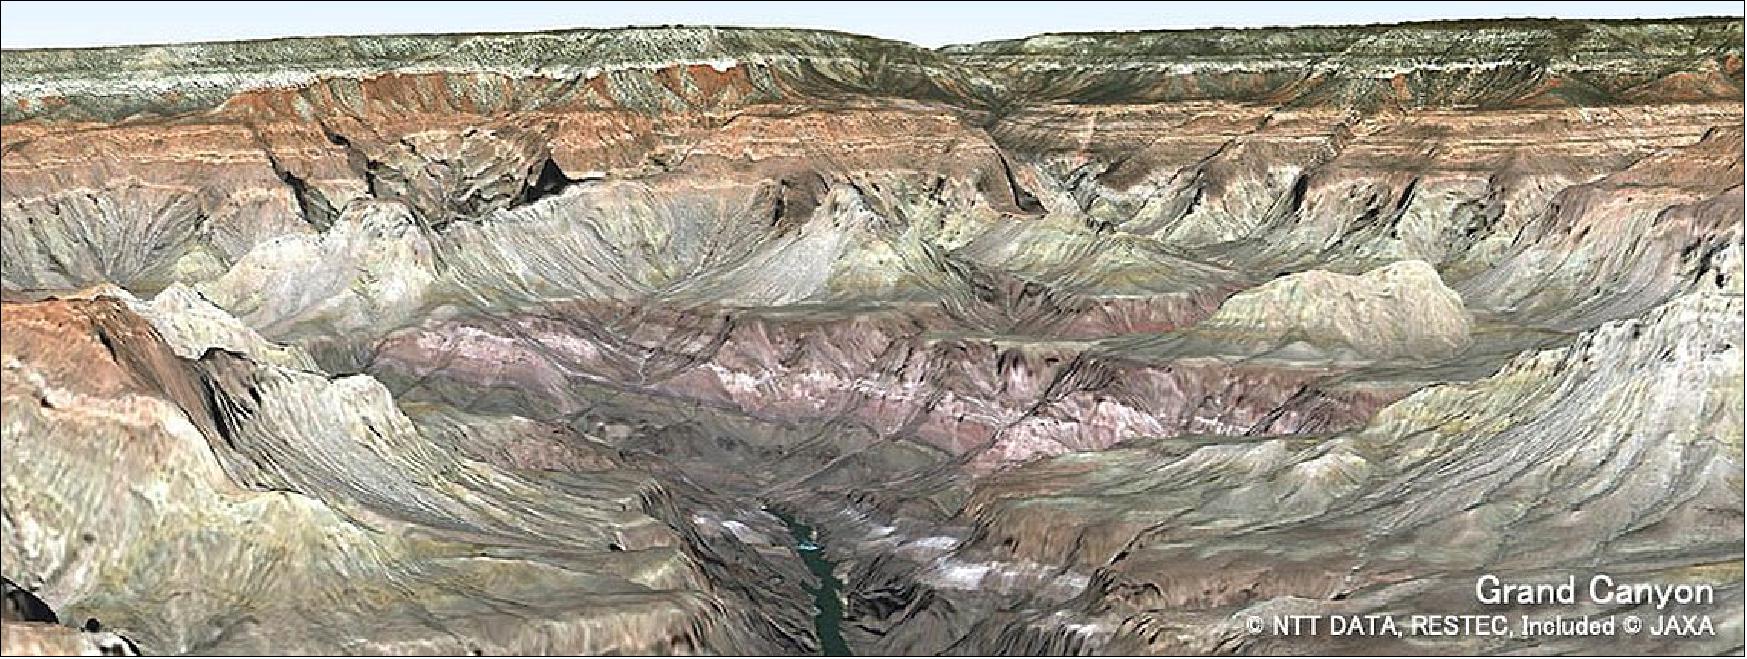 Figure 12: Sample 3D image of a portion of the Grand Canyon (image credit: NTT Data, RESTEC, JAXA)